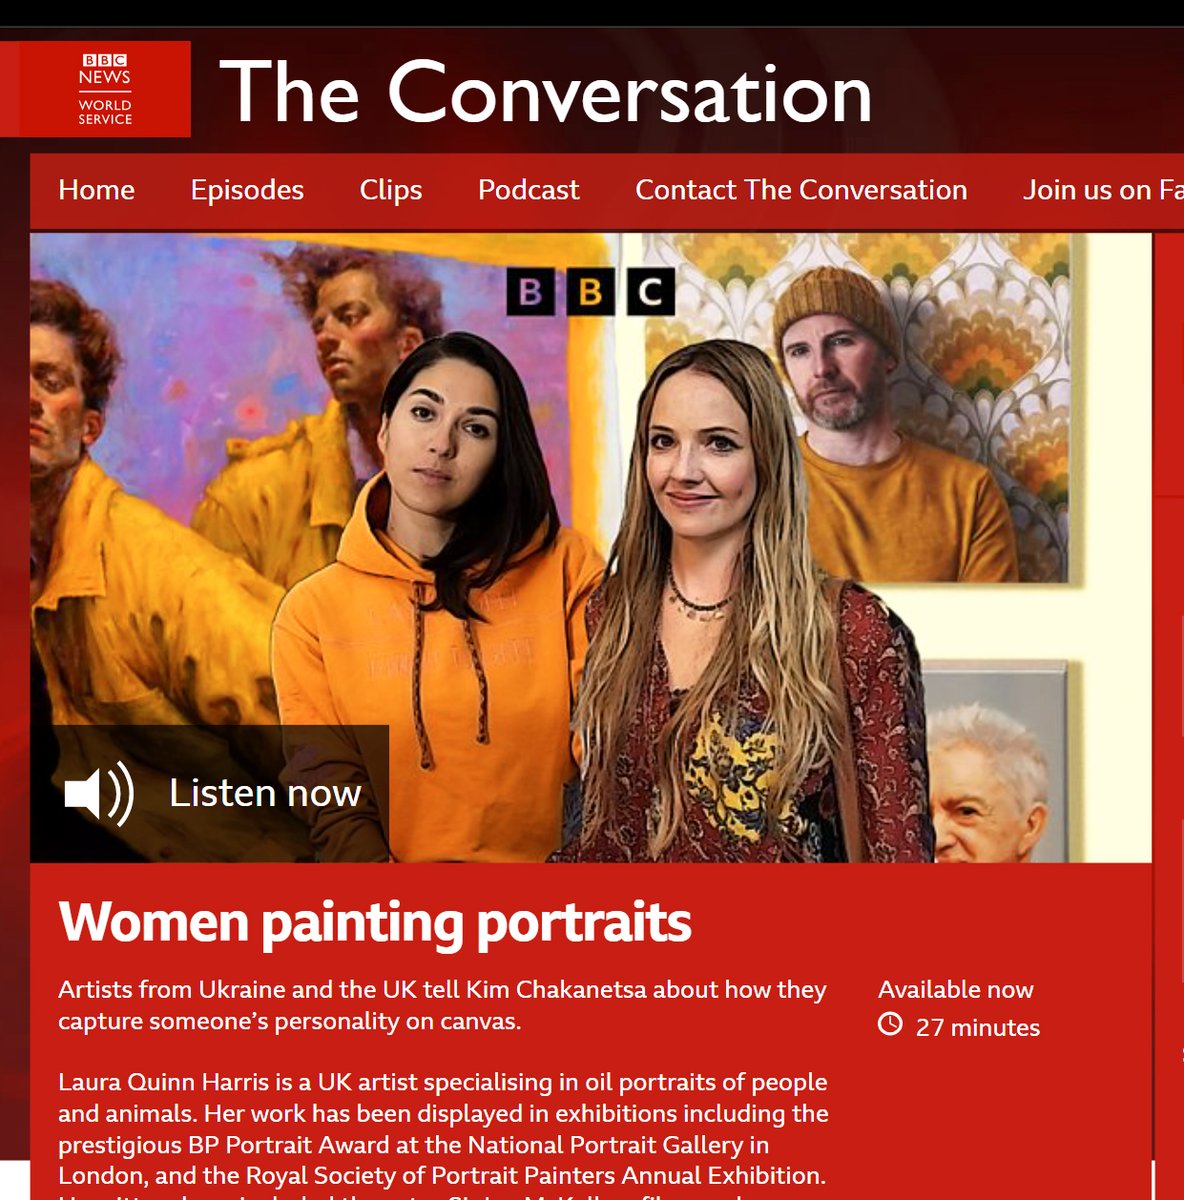 📻 Now available!! 📻 The Conversation brings together two women from different countries, united by a common passion, experience or expertise. Listen to me and @tania_rivilis chat about our lives and work with Kim Chakanetsa on @bbcworldservice here: bbc.co.uk/programmes/w3c…